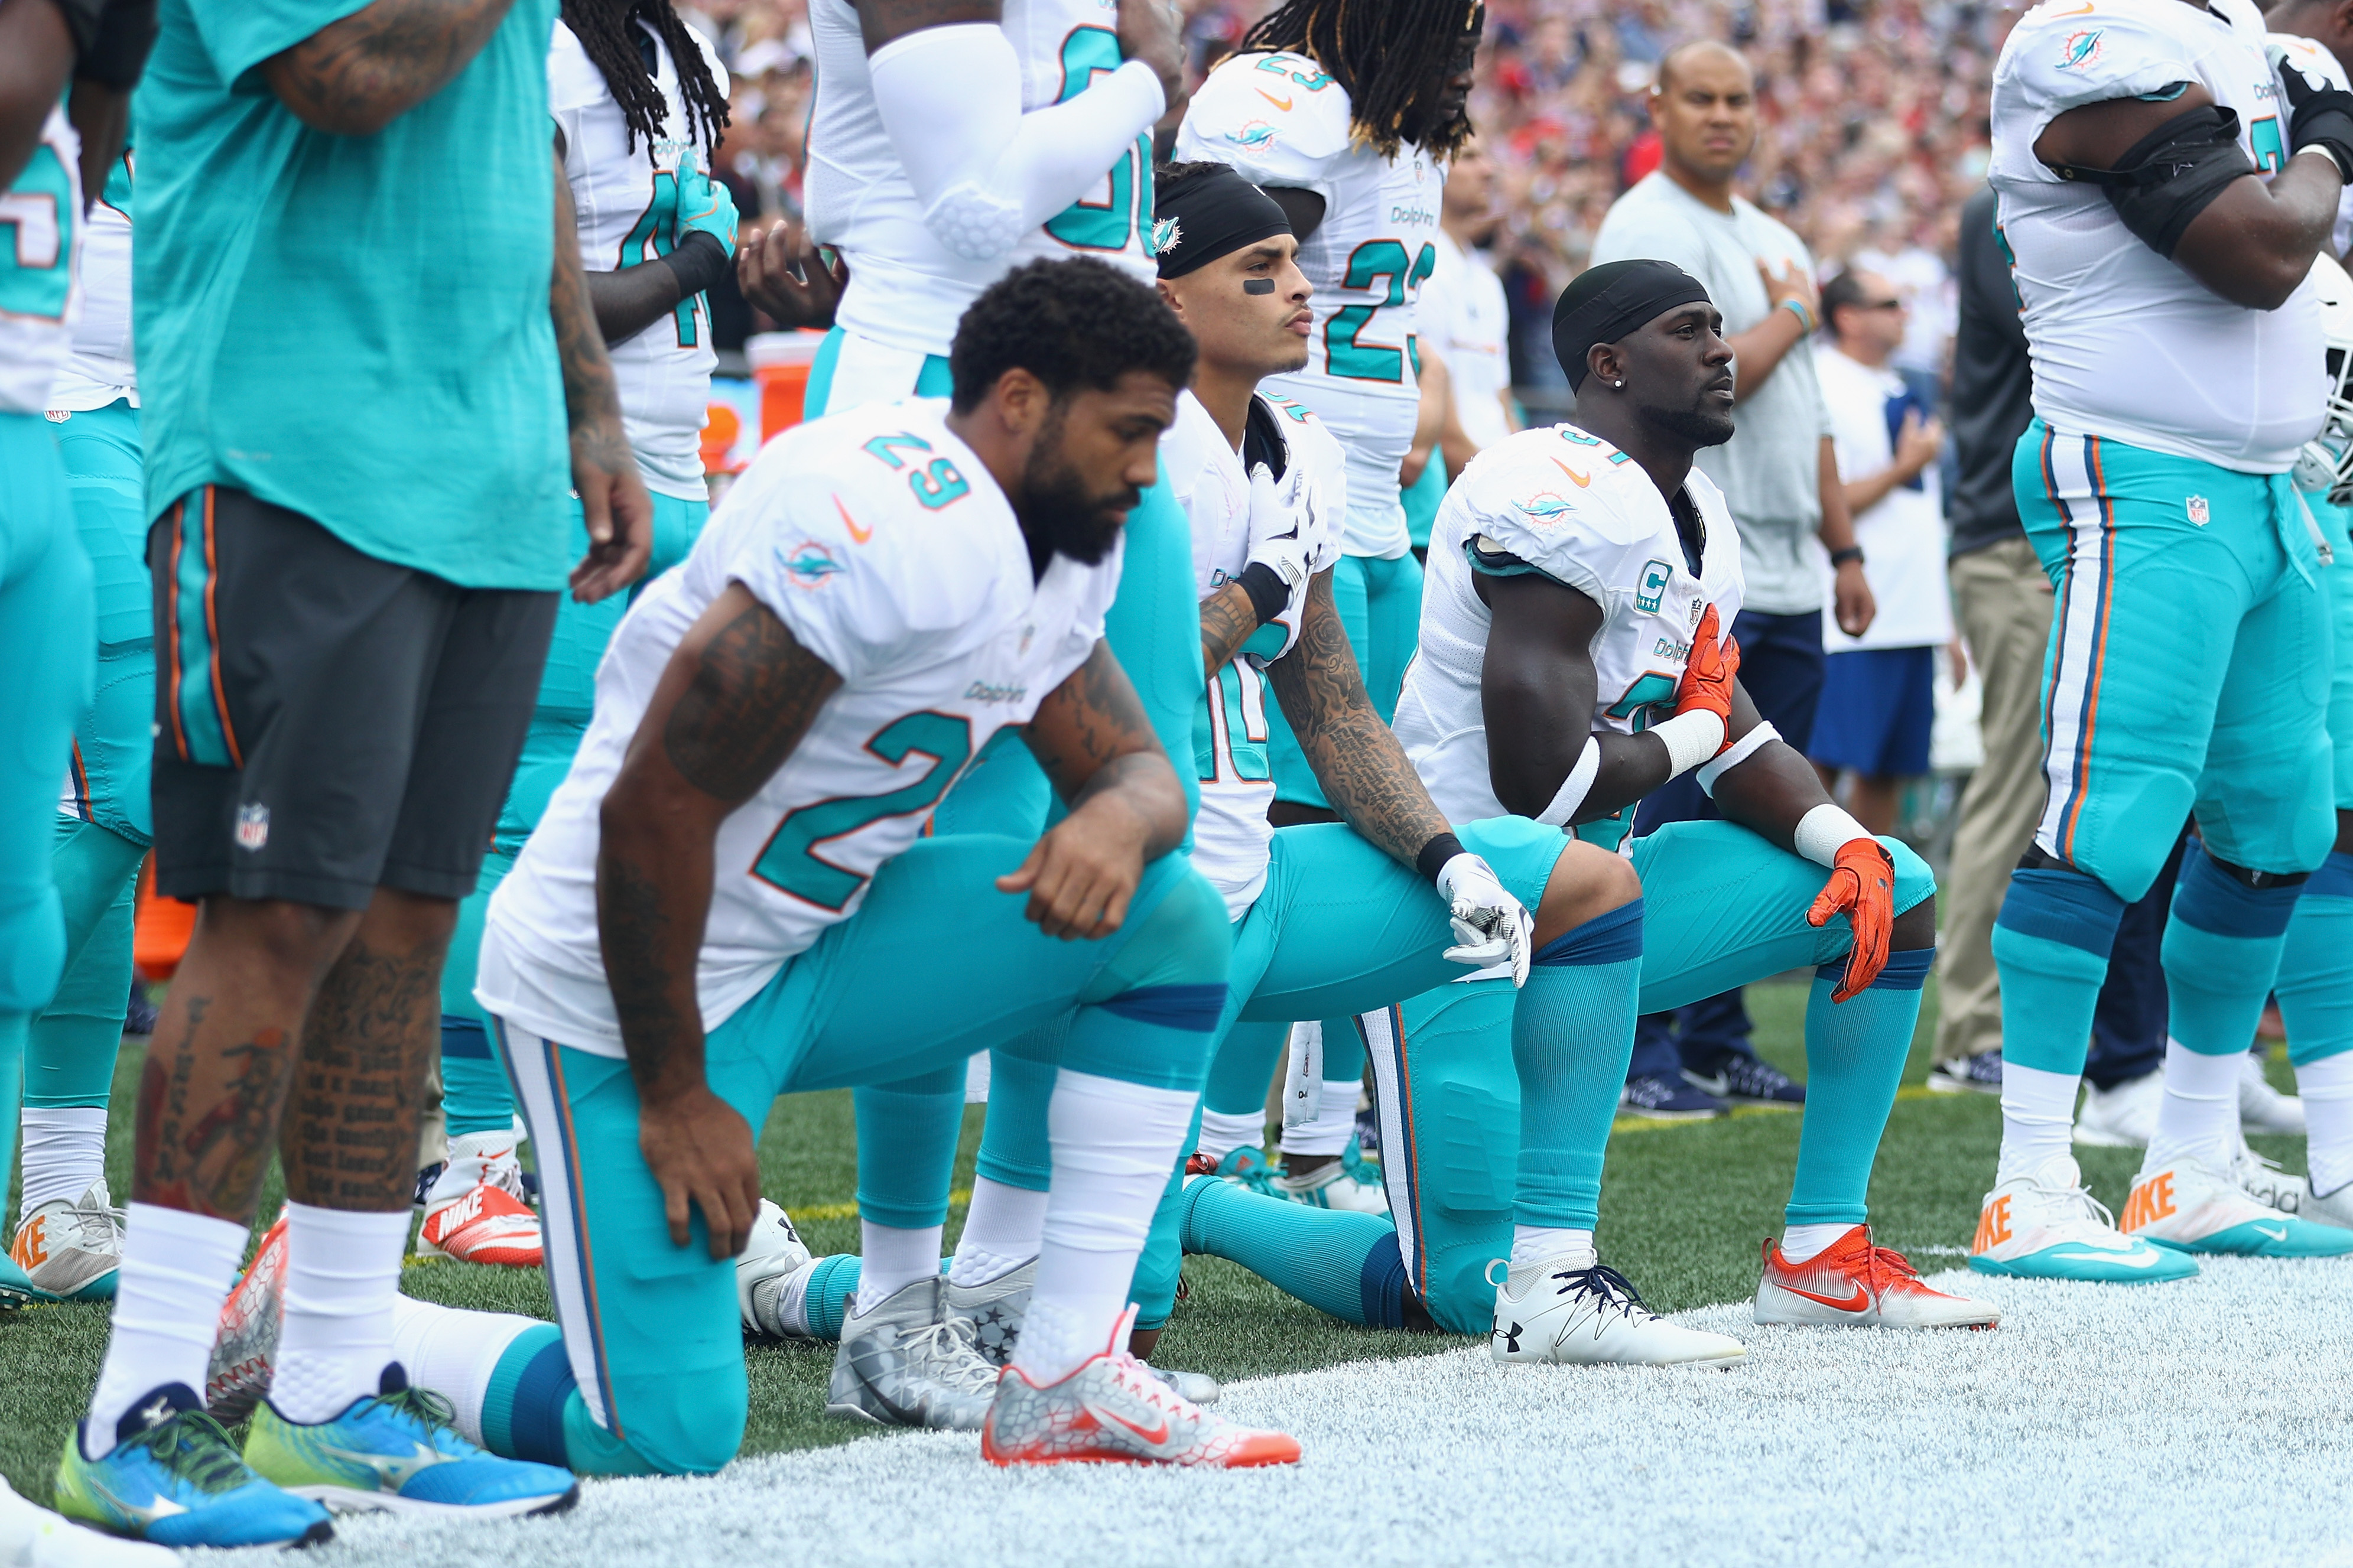 (L-R) Arian Foster #29, Kenny Stills #10 and Michael Thomas #31 of the Miami Dolphins kneel during the national anthem before the game against the New England Patriots at Gillette Stadium in Foxboro, Mass., on Sept. 18, 2016. (Maddie Meyer—Getty Images)